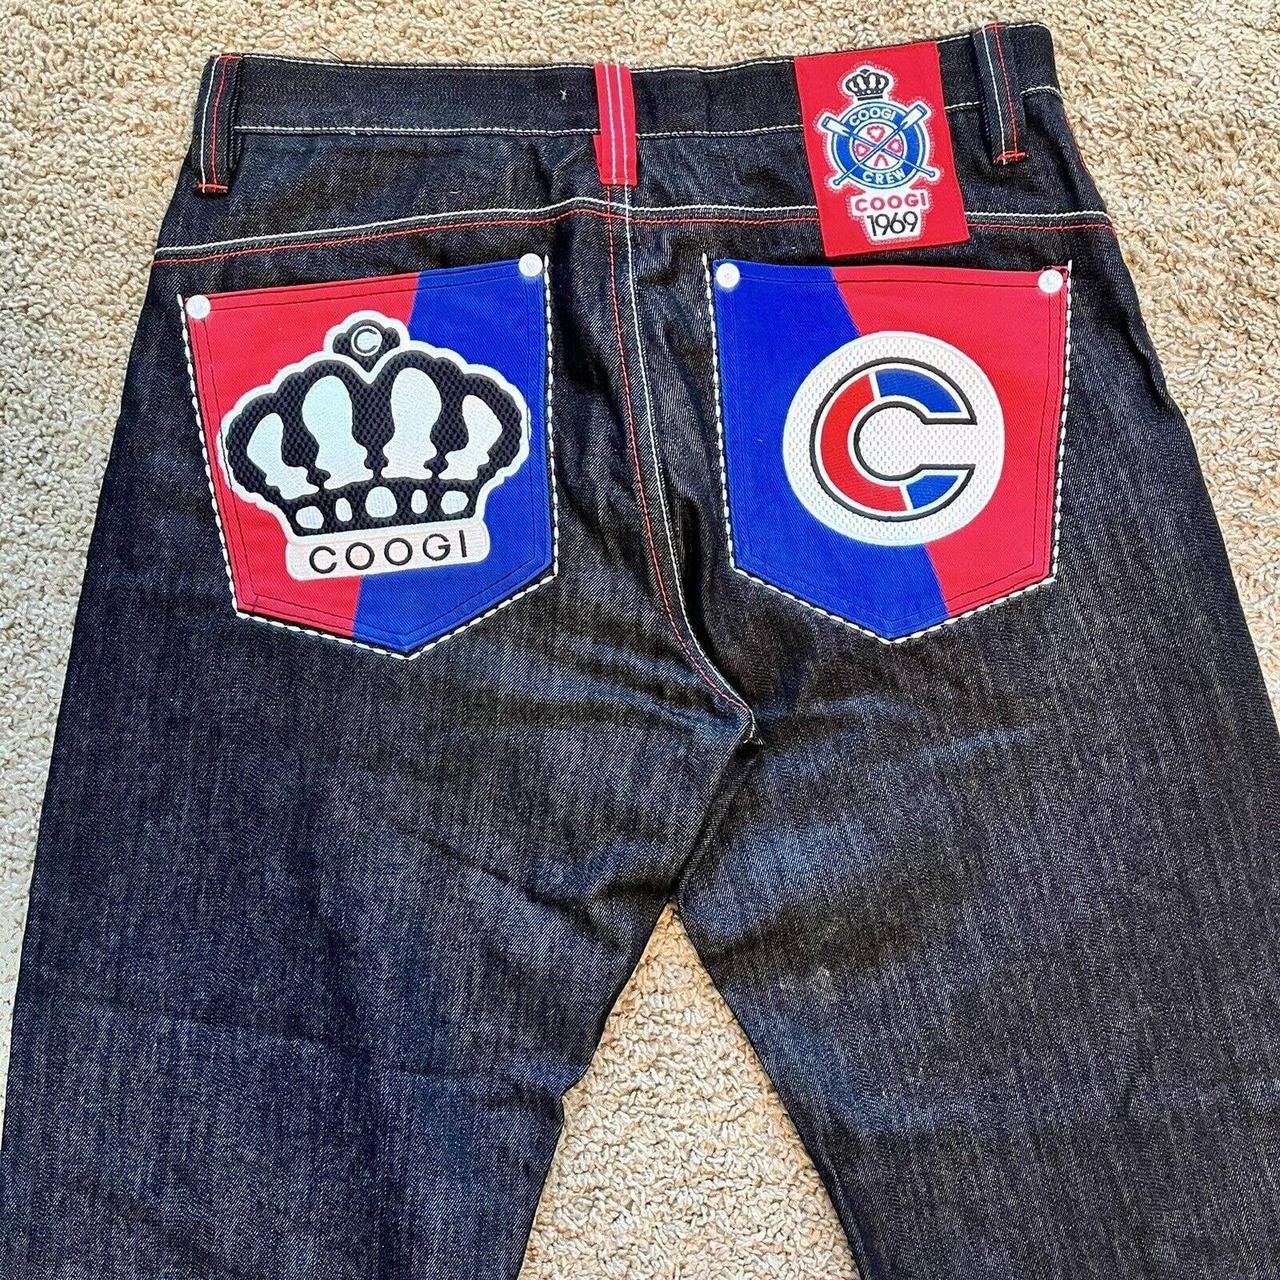 Product Image 1 - COOGI CREW Jeans 1969 Crown